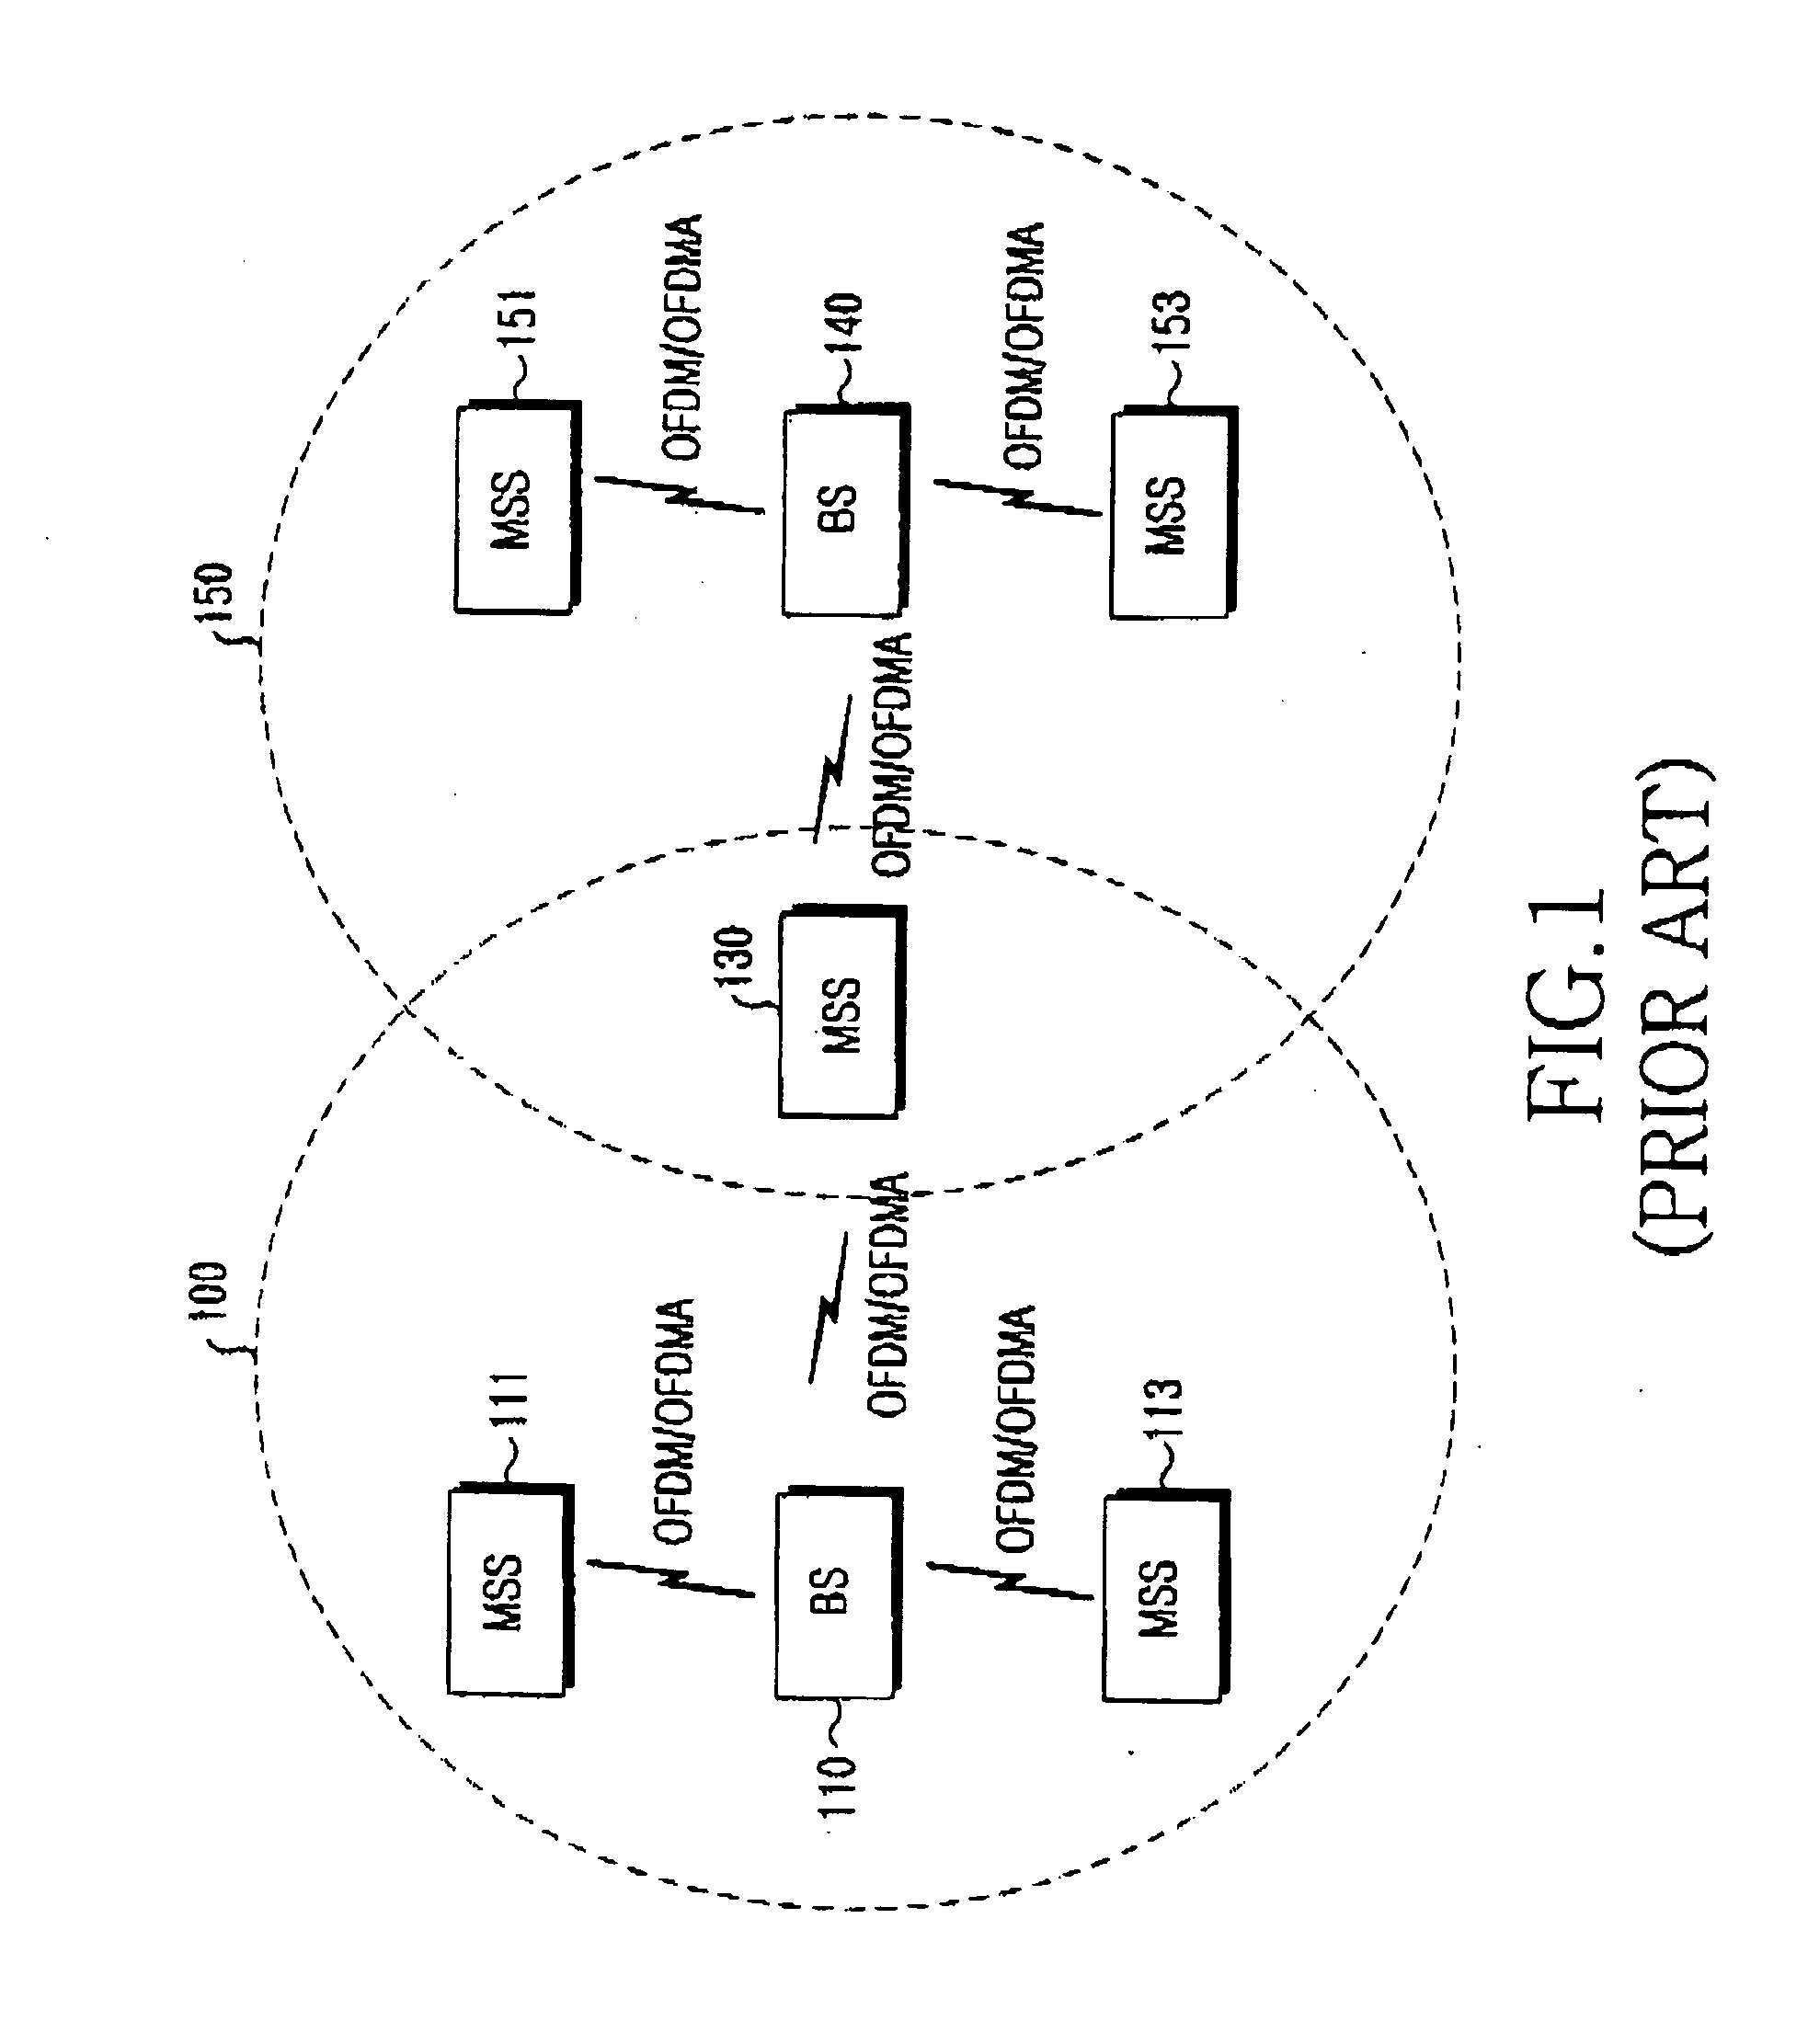 System and method for allocating and indicating ranging region in a broadband wireless access communication system